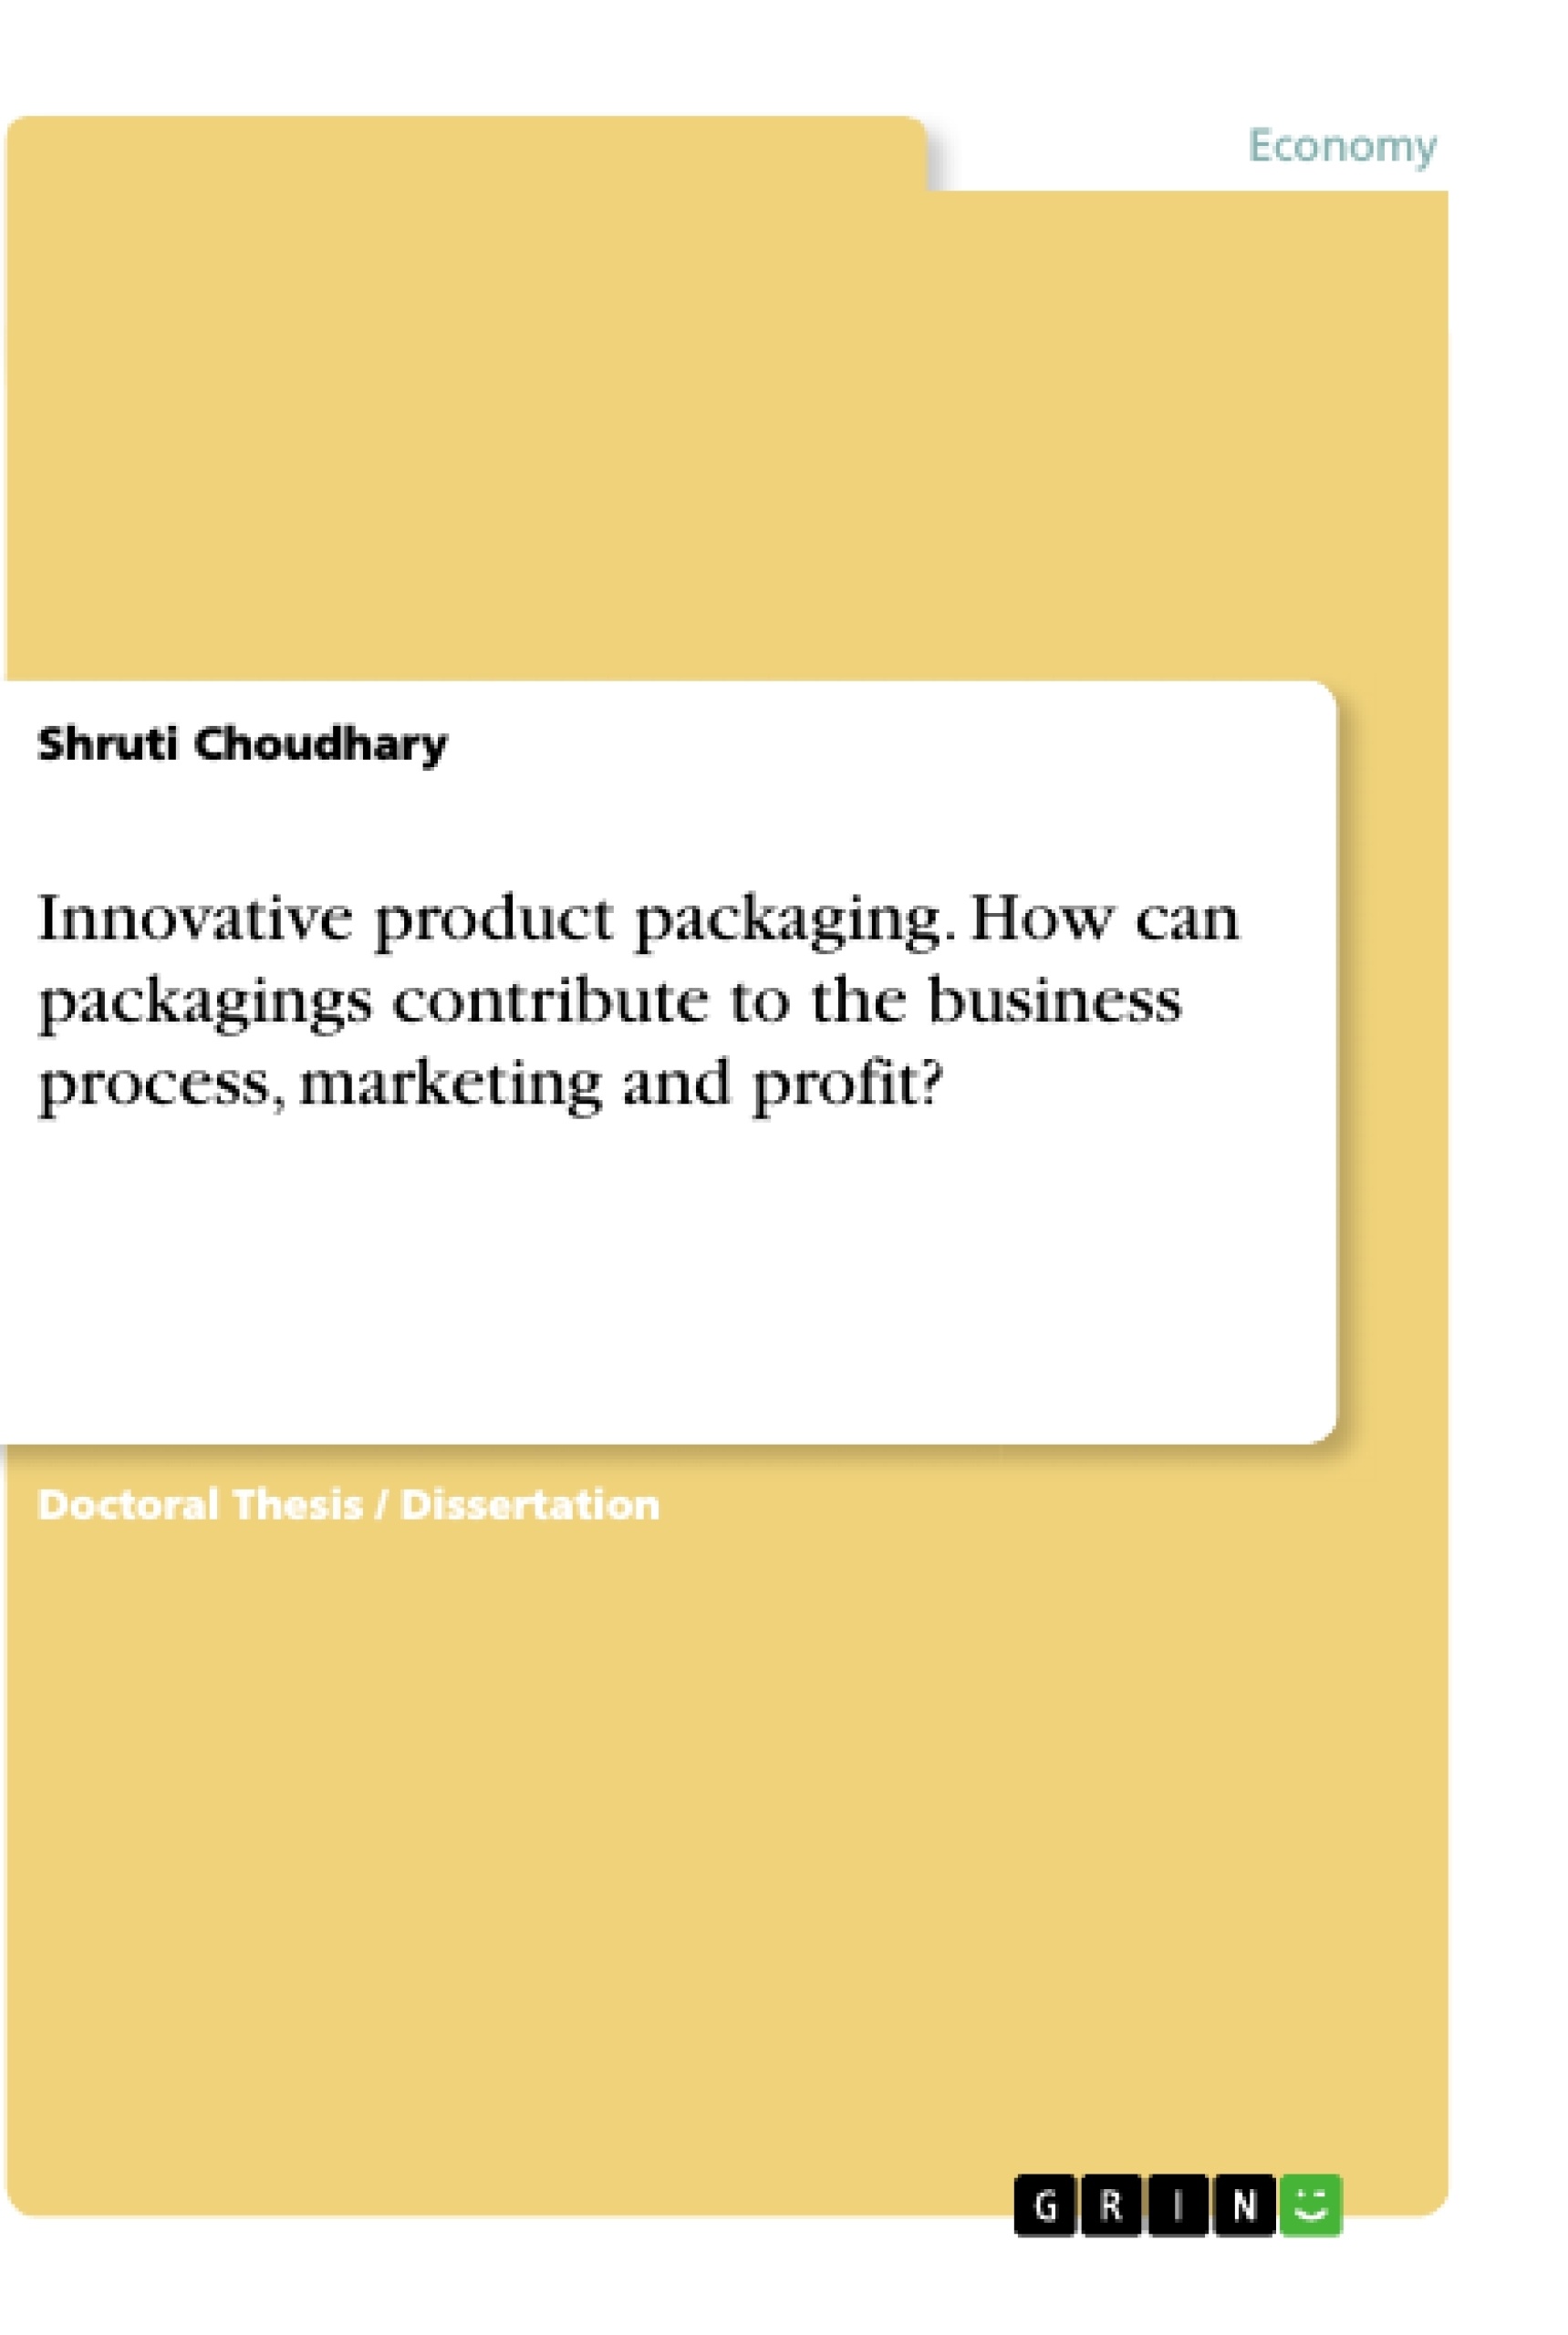 Titre: Innovative product packaging. How can packagings contribute to the business process, marketing and profit?